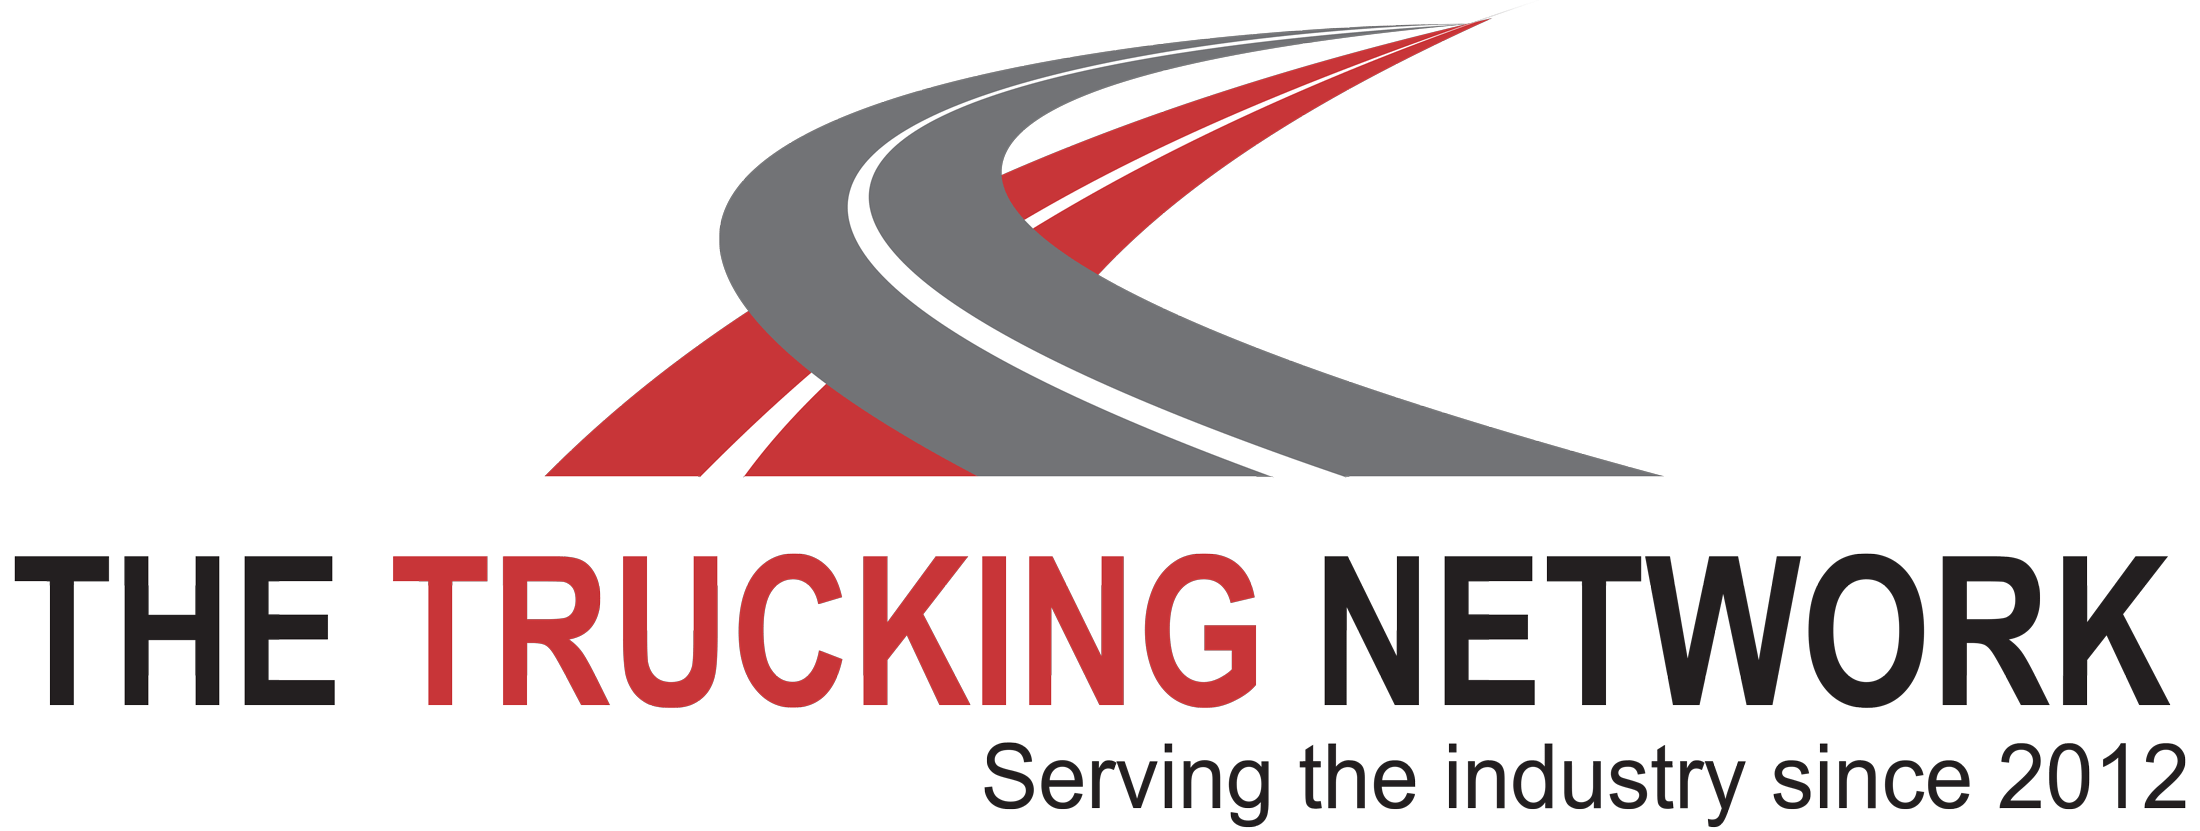 The Trucking Network Inc.